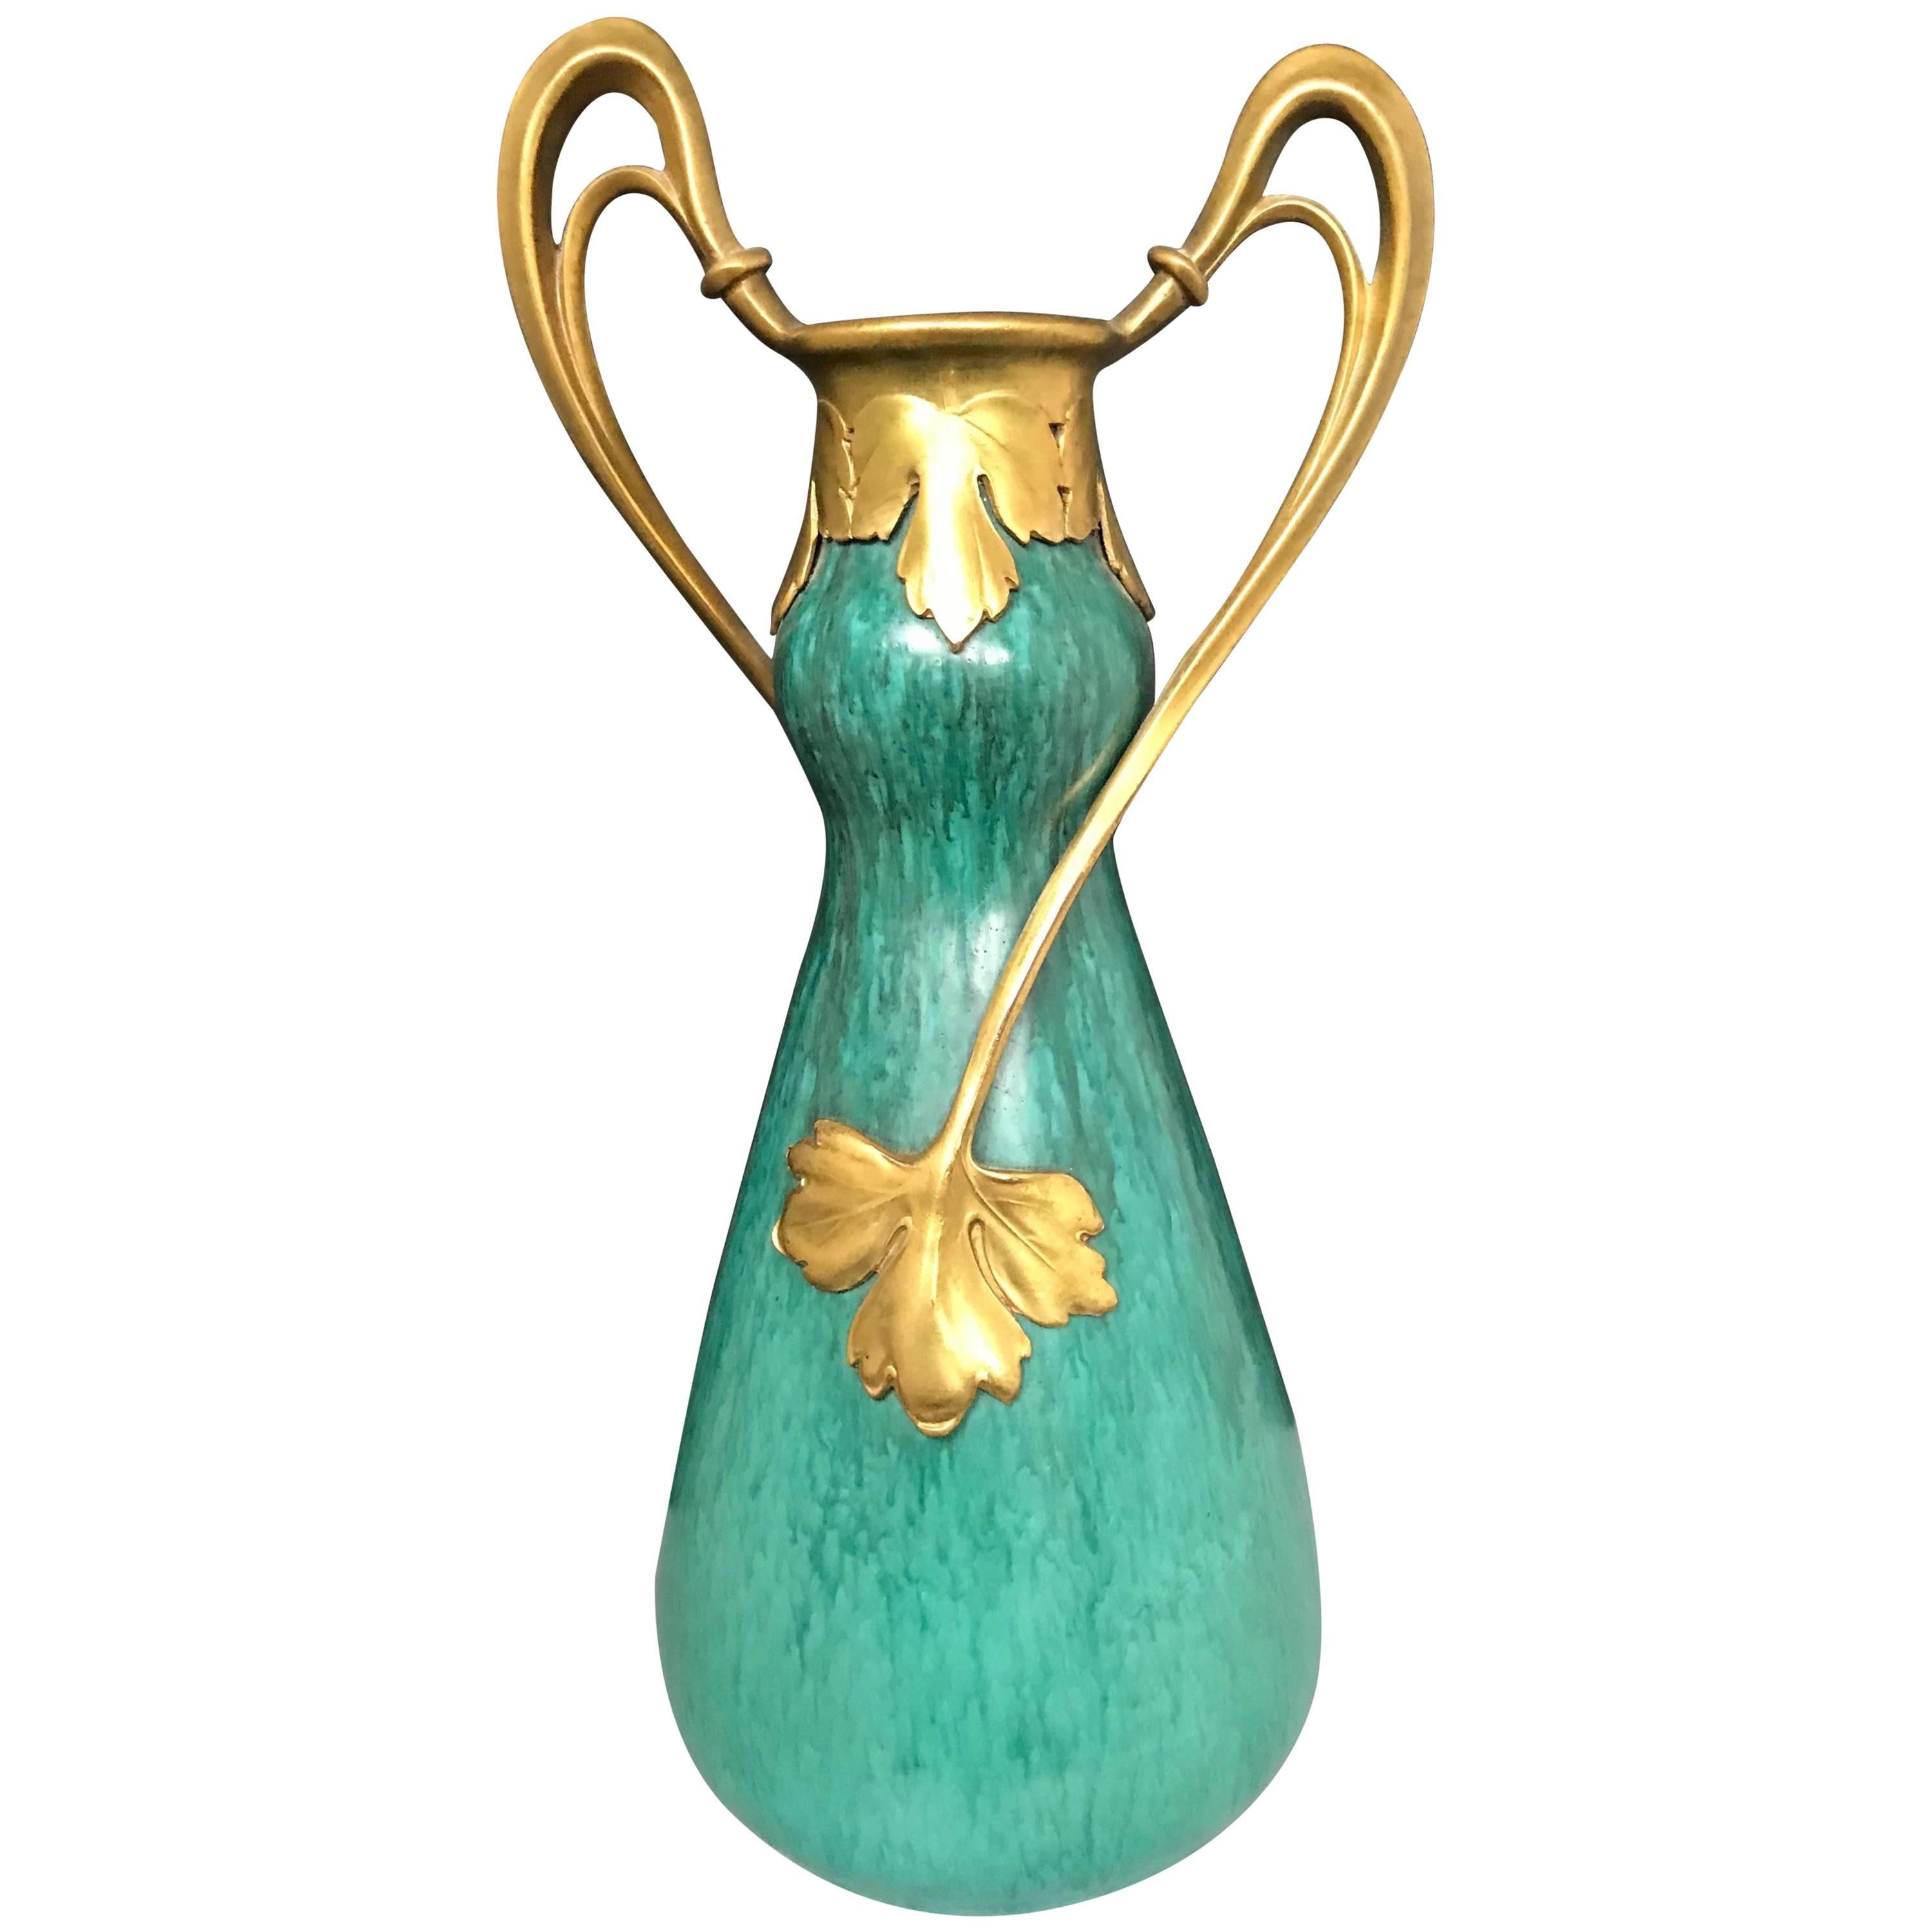 Striking Art Nouveau Ceramic and Bronze-Mounted Vase in Victor Horta Style  For Sale at 1stDibs